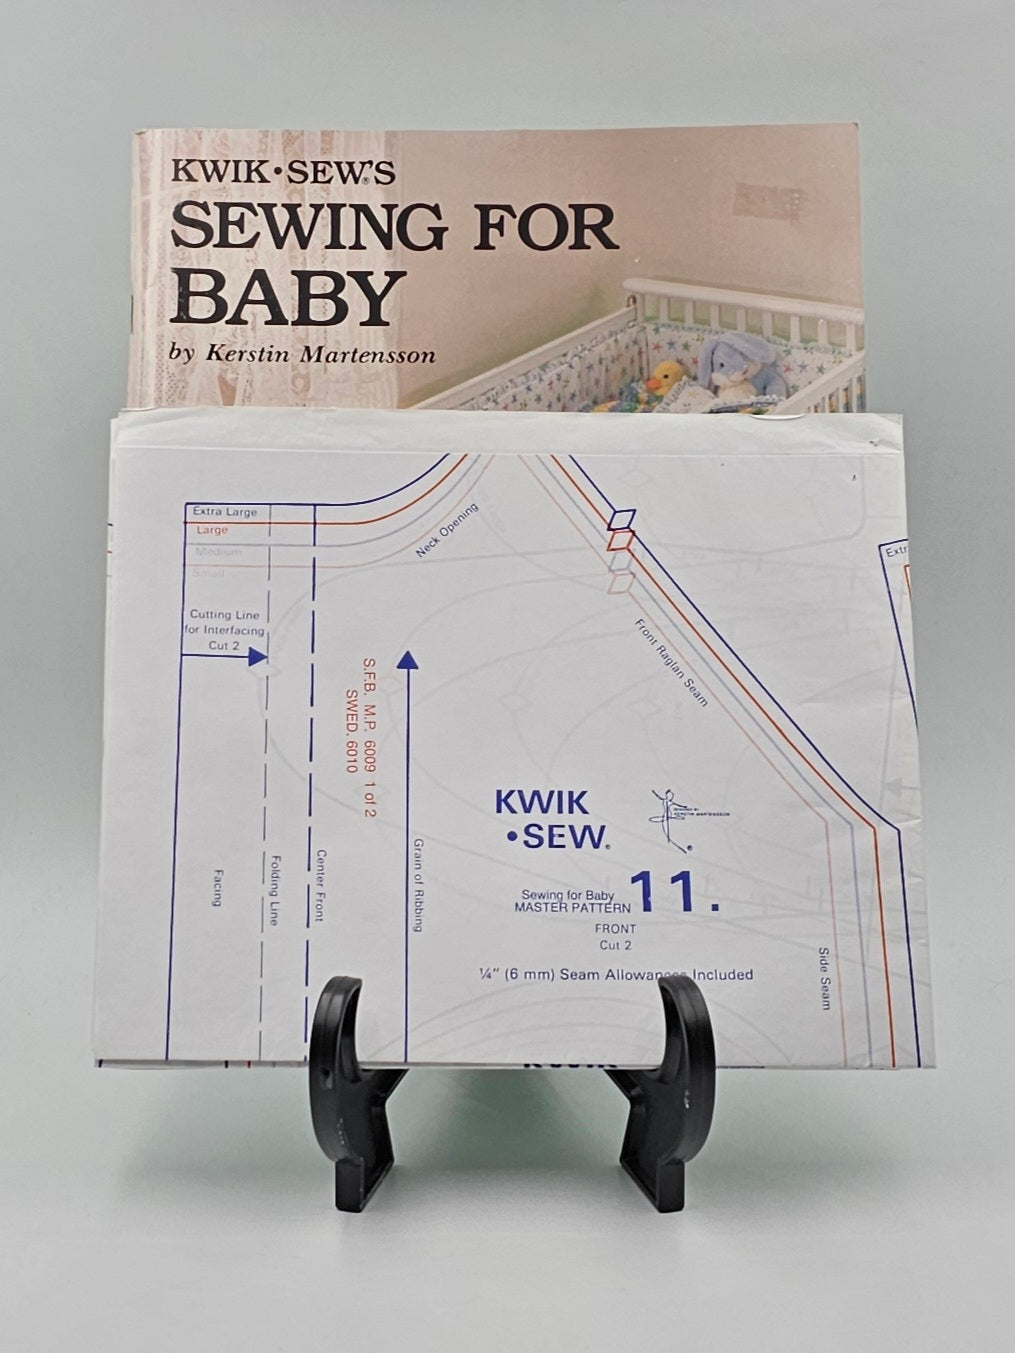 Sewing for Baby by Kerstin Martensson